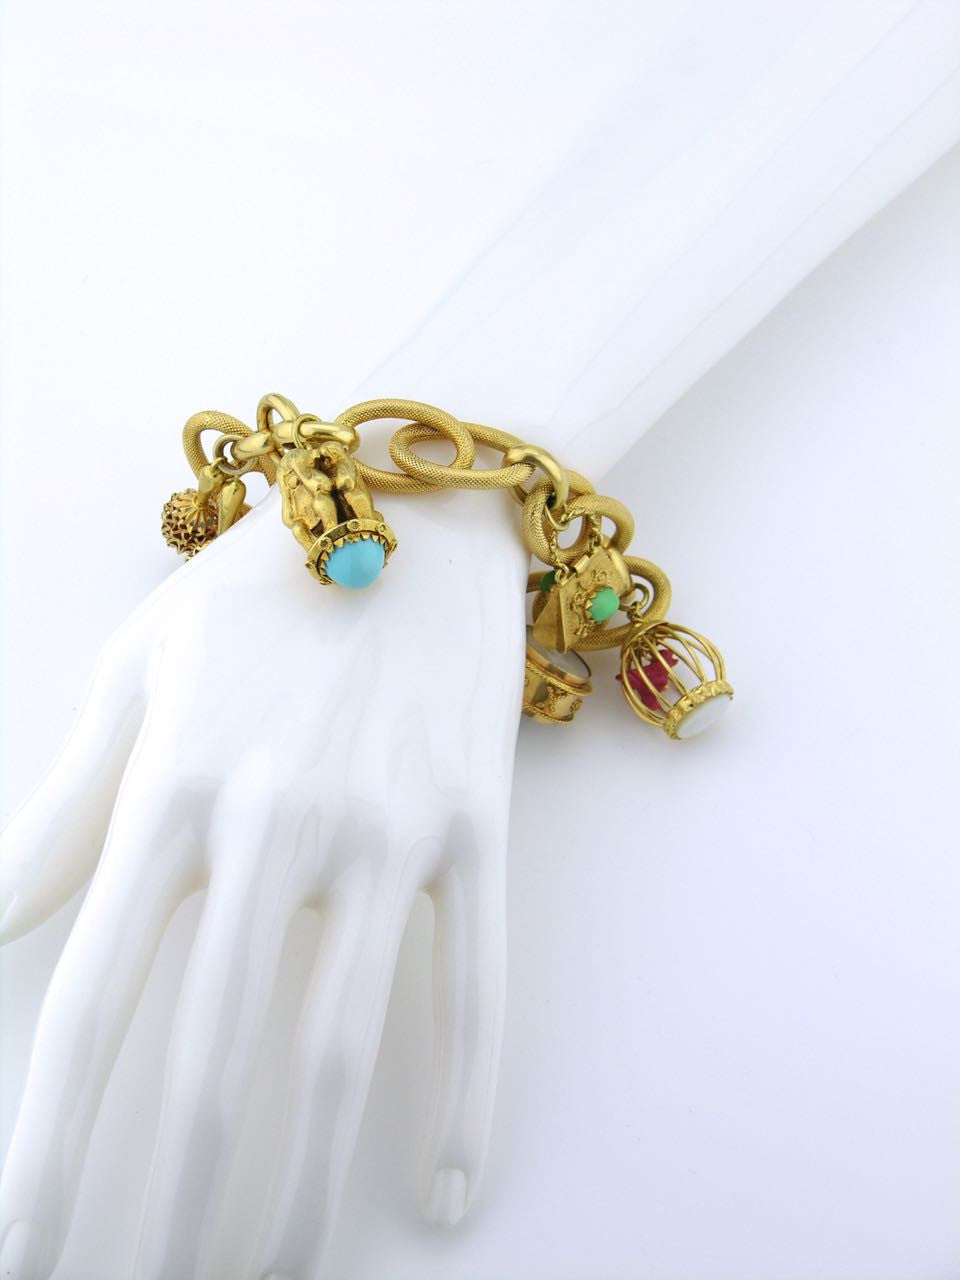 Opera Antiques Valletta - Circa 1960 vintage charm bracelet in 18ct yellow  gold having 1 charm vase with coral. Weighing 32 grams. With a round sprung  clasp and safety chain. #gold #goldcharmbracelet #